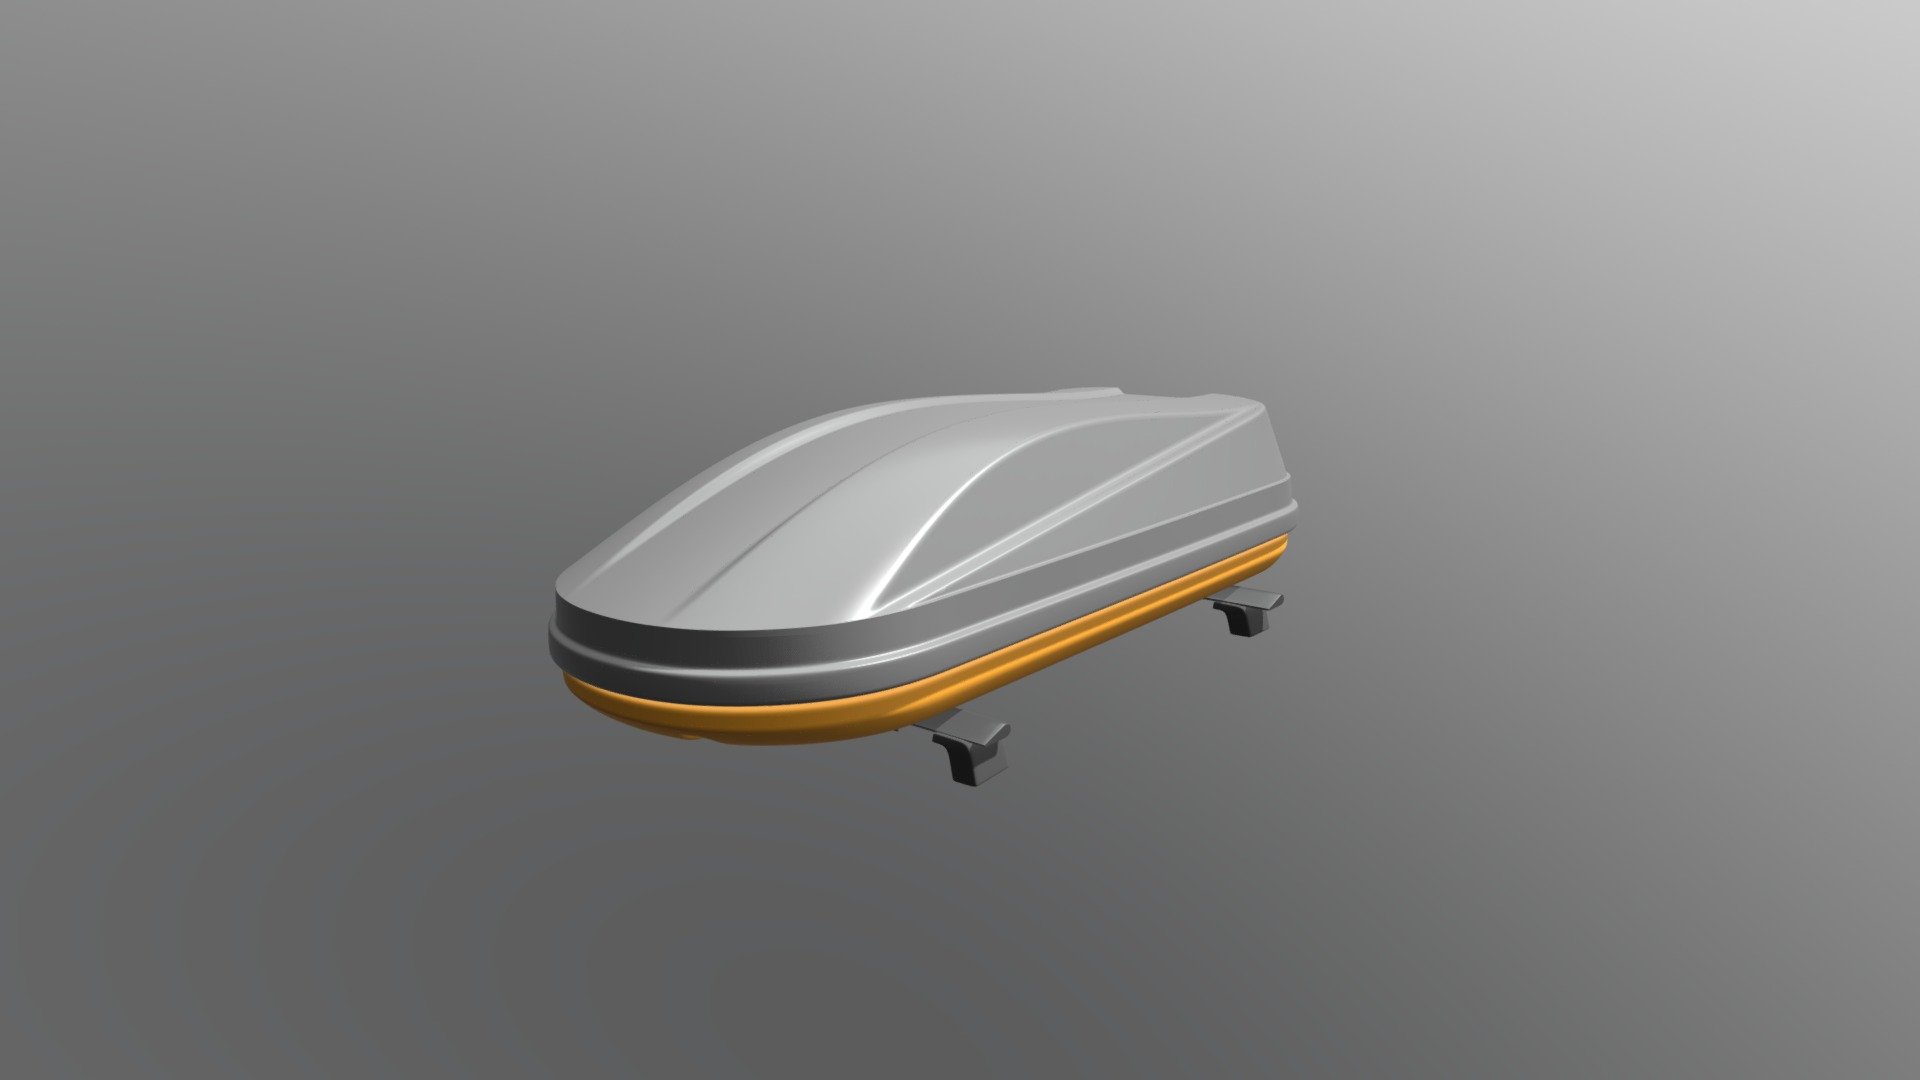 A car roof top box (cargo box) Modelled natively in Autodesk Alias and exported for various compatible formats. This Model comes as a closed box ready to be placed on top of any of your car designs or existing models.

Formats: 
.wire - Autodesk Alias
.blender - Blender
.step - surface data
.catpart - CATIA
.fbx - polygon data - Roof Top Cargo Box Roof Box Cargo Box - Buy Royalty Free 3D model by ankishugupta 3d model